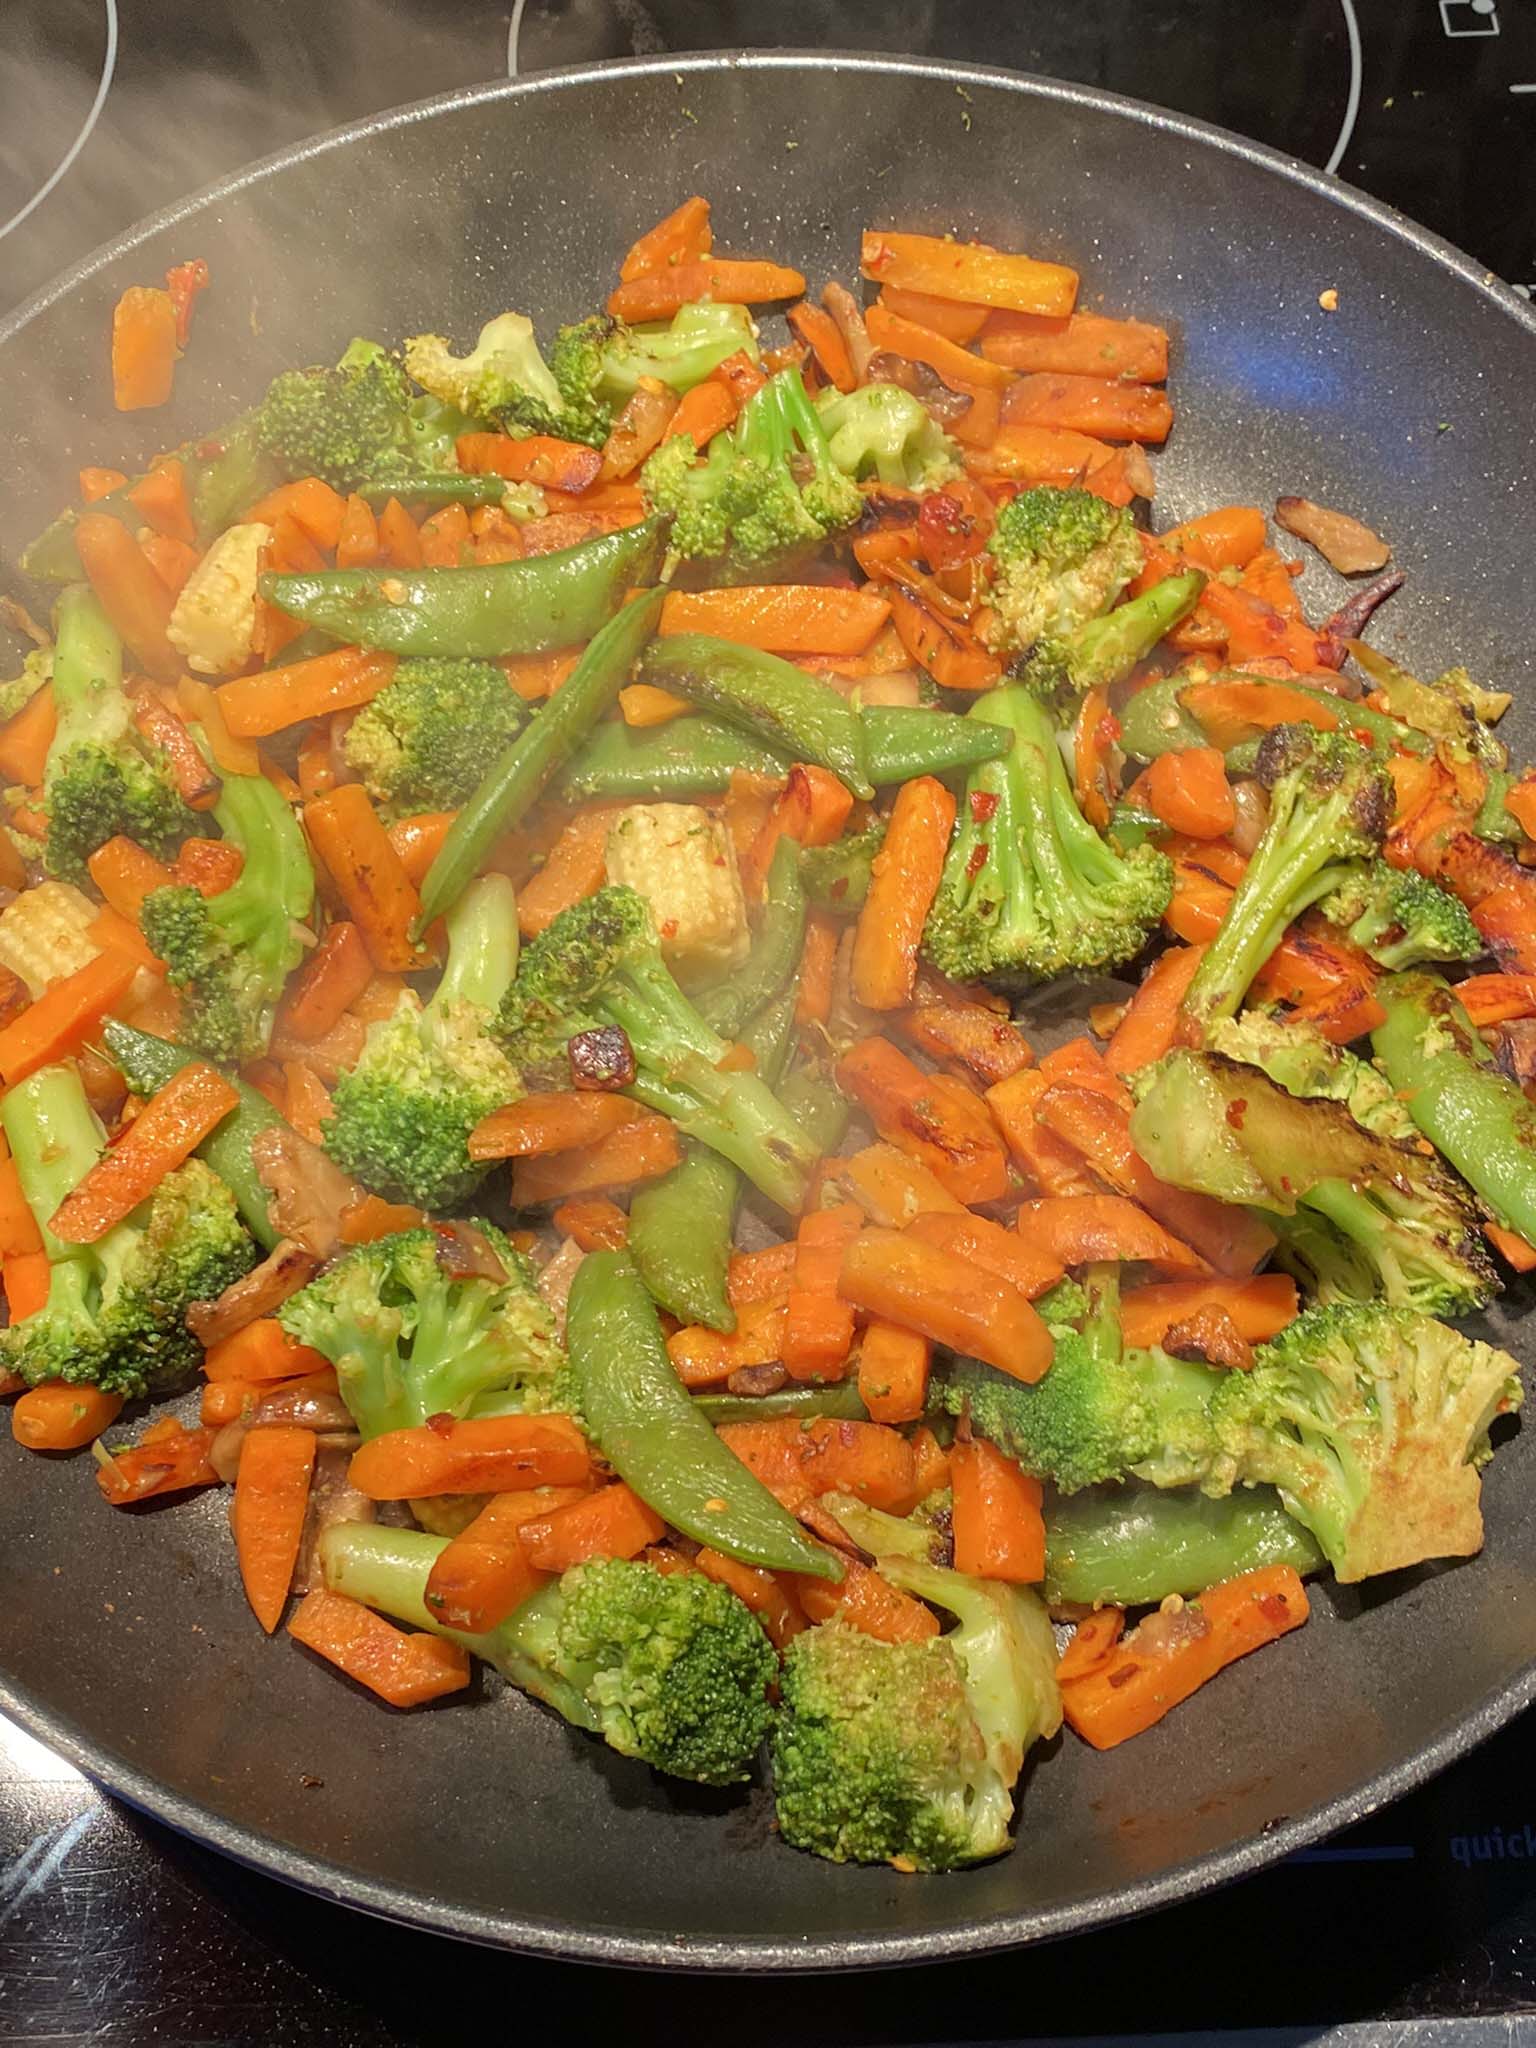 Sauteed vegetables in a frying pan.